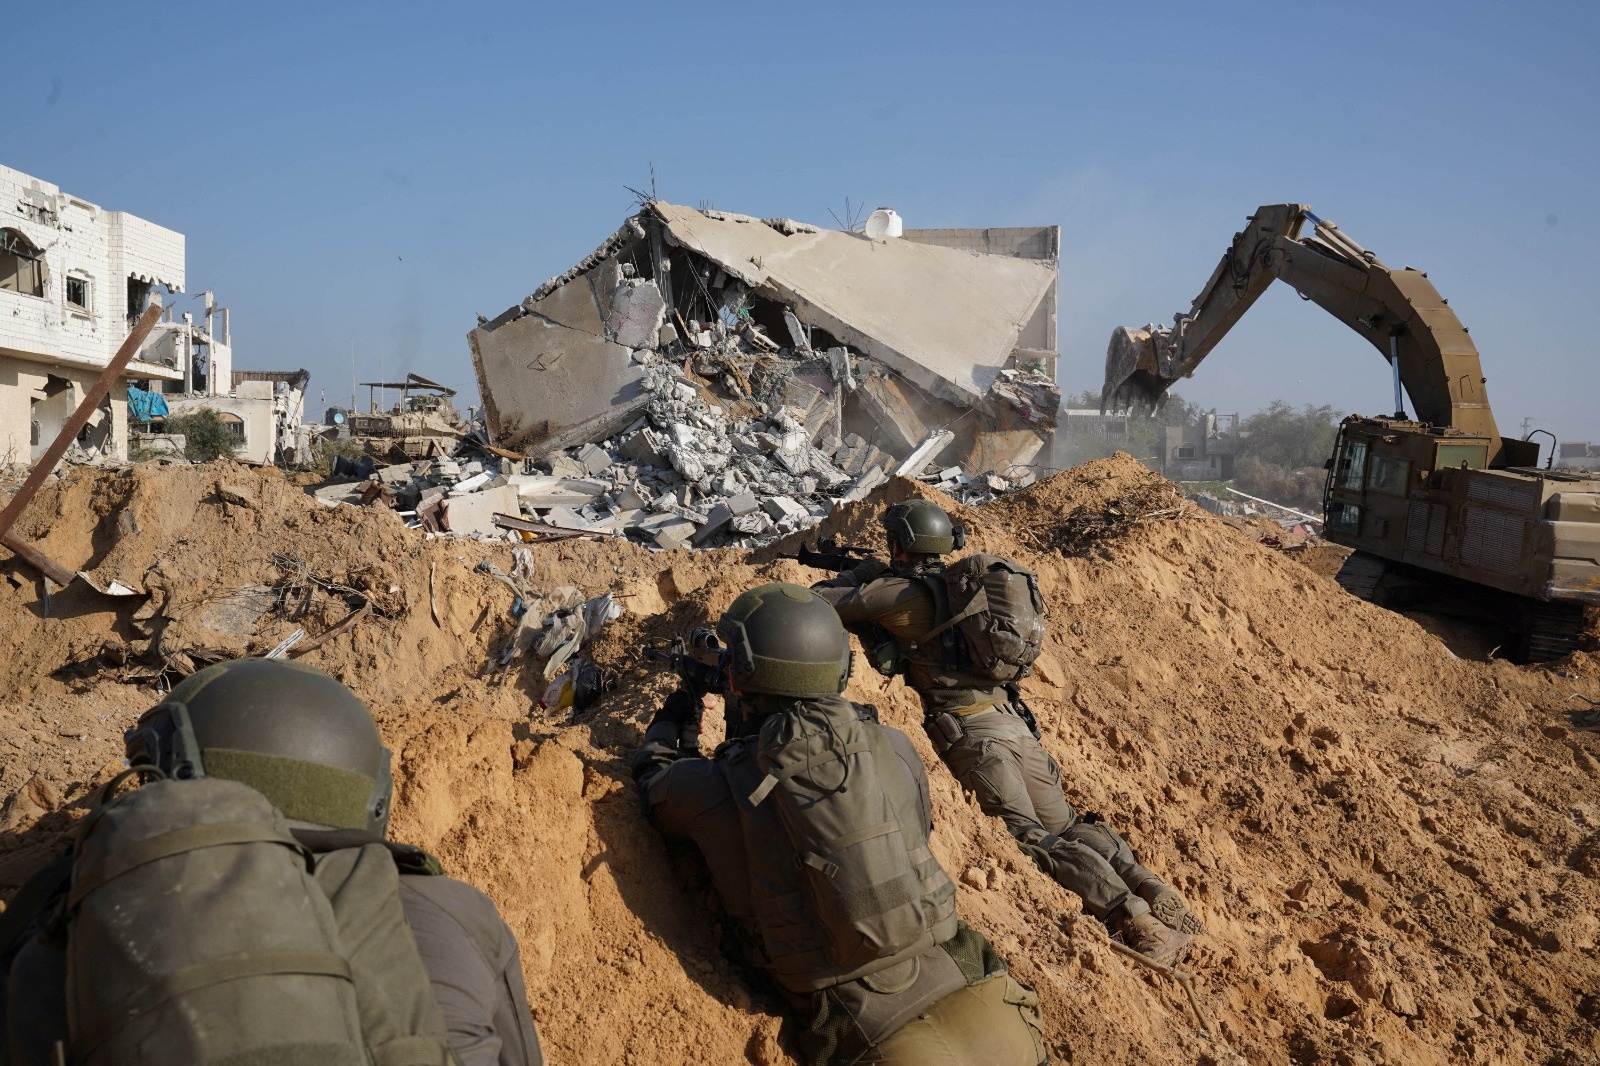 Four other Israeli soldiers were killed